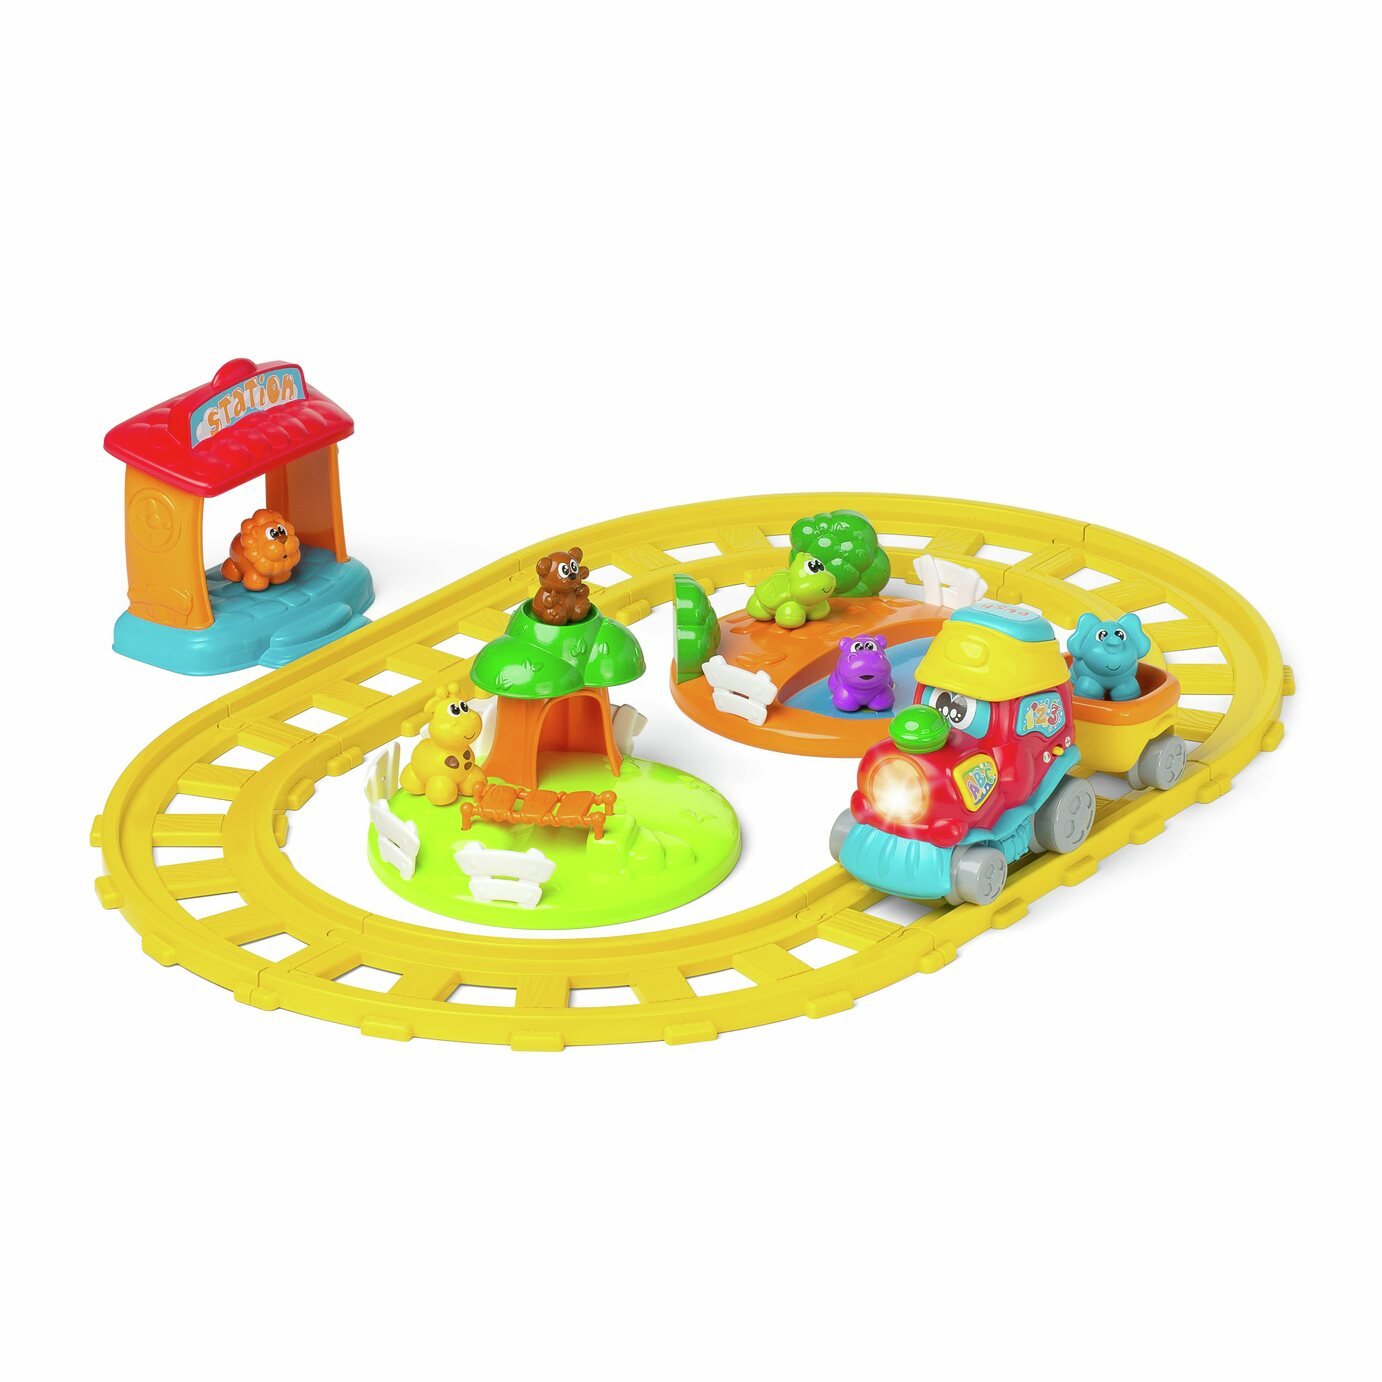 Adventure Train by Chicco Review